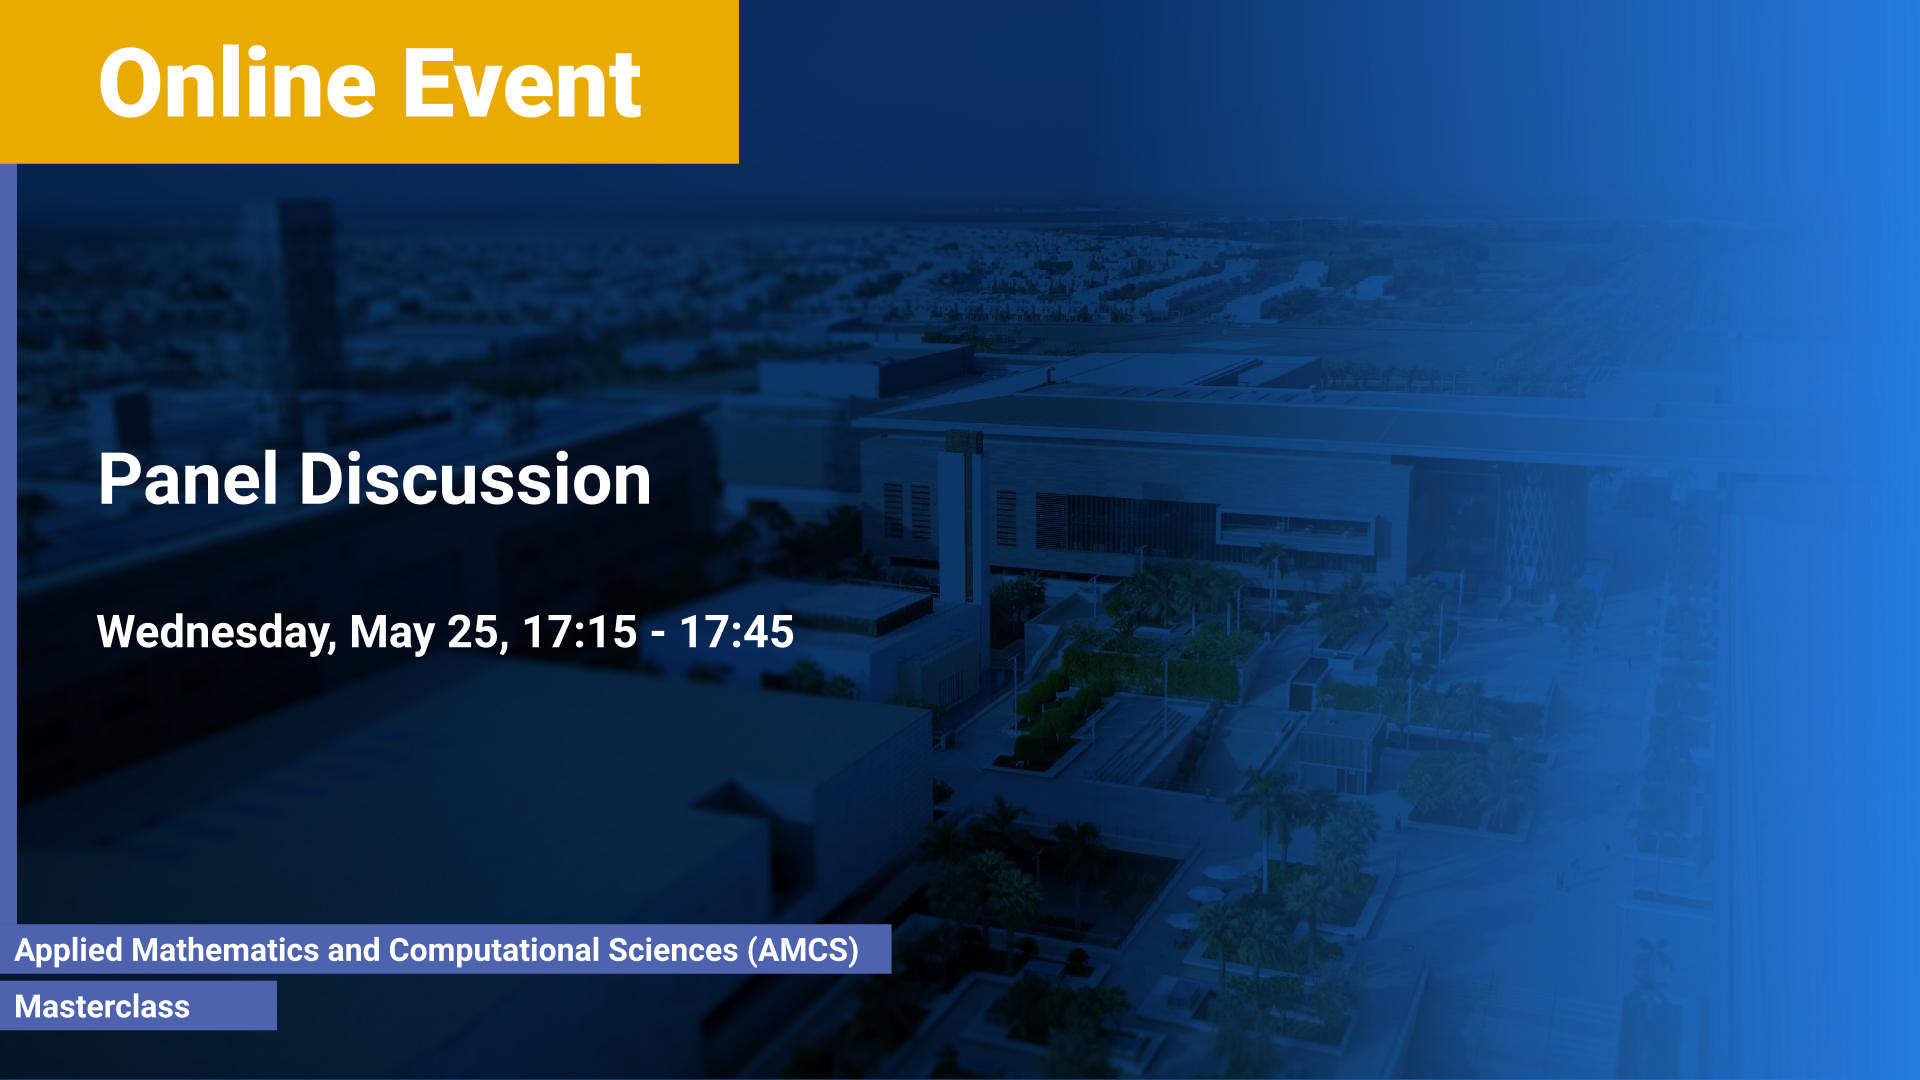 KAUST-CEMSE-AMCS-Masterclass-Numerical-Analysis-and-Scitifical-Computing-Panel Discussion-25th-May.png